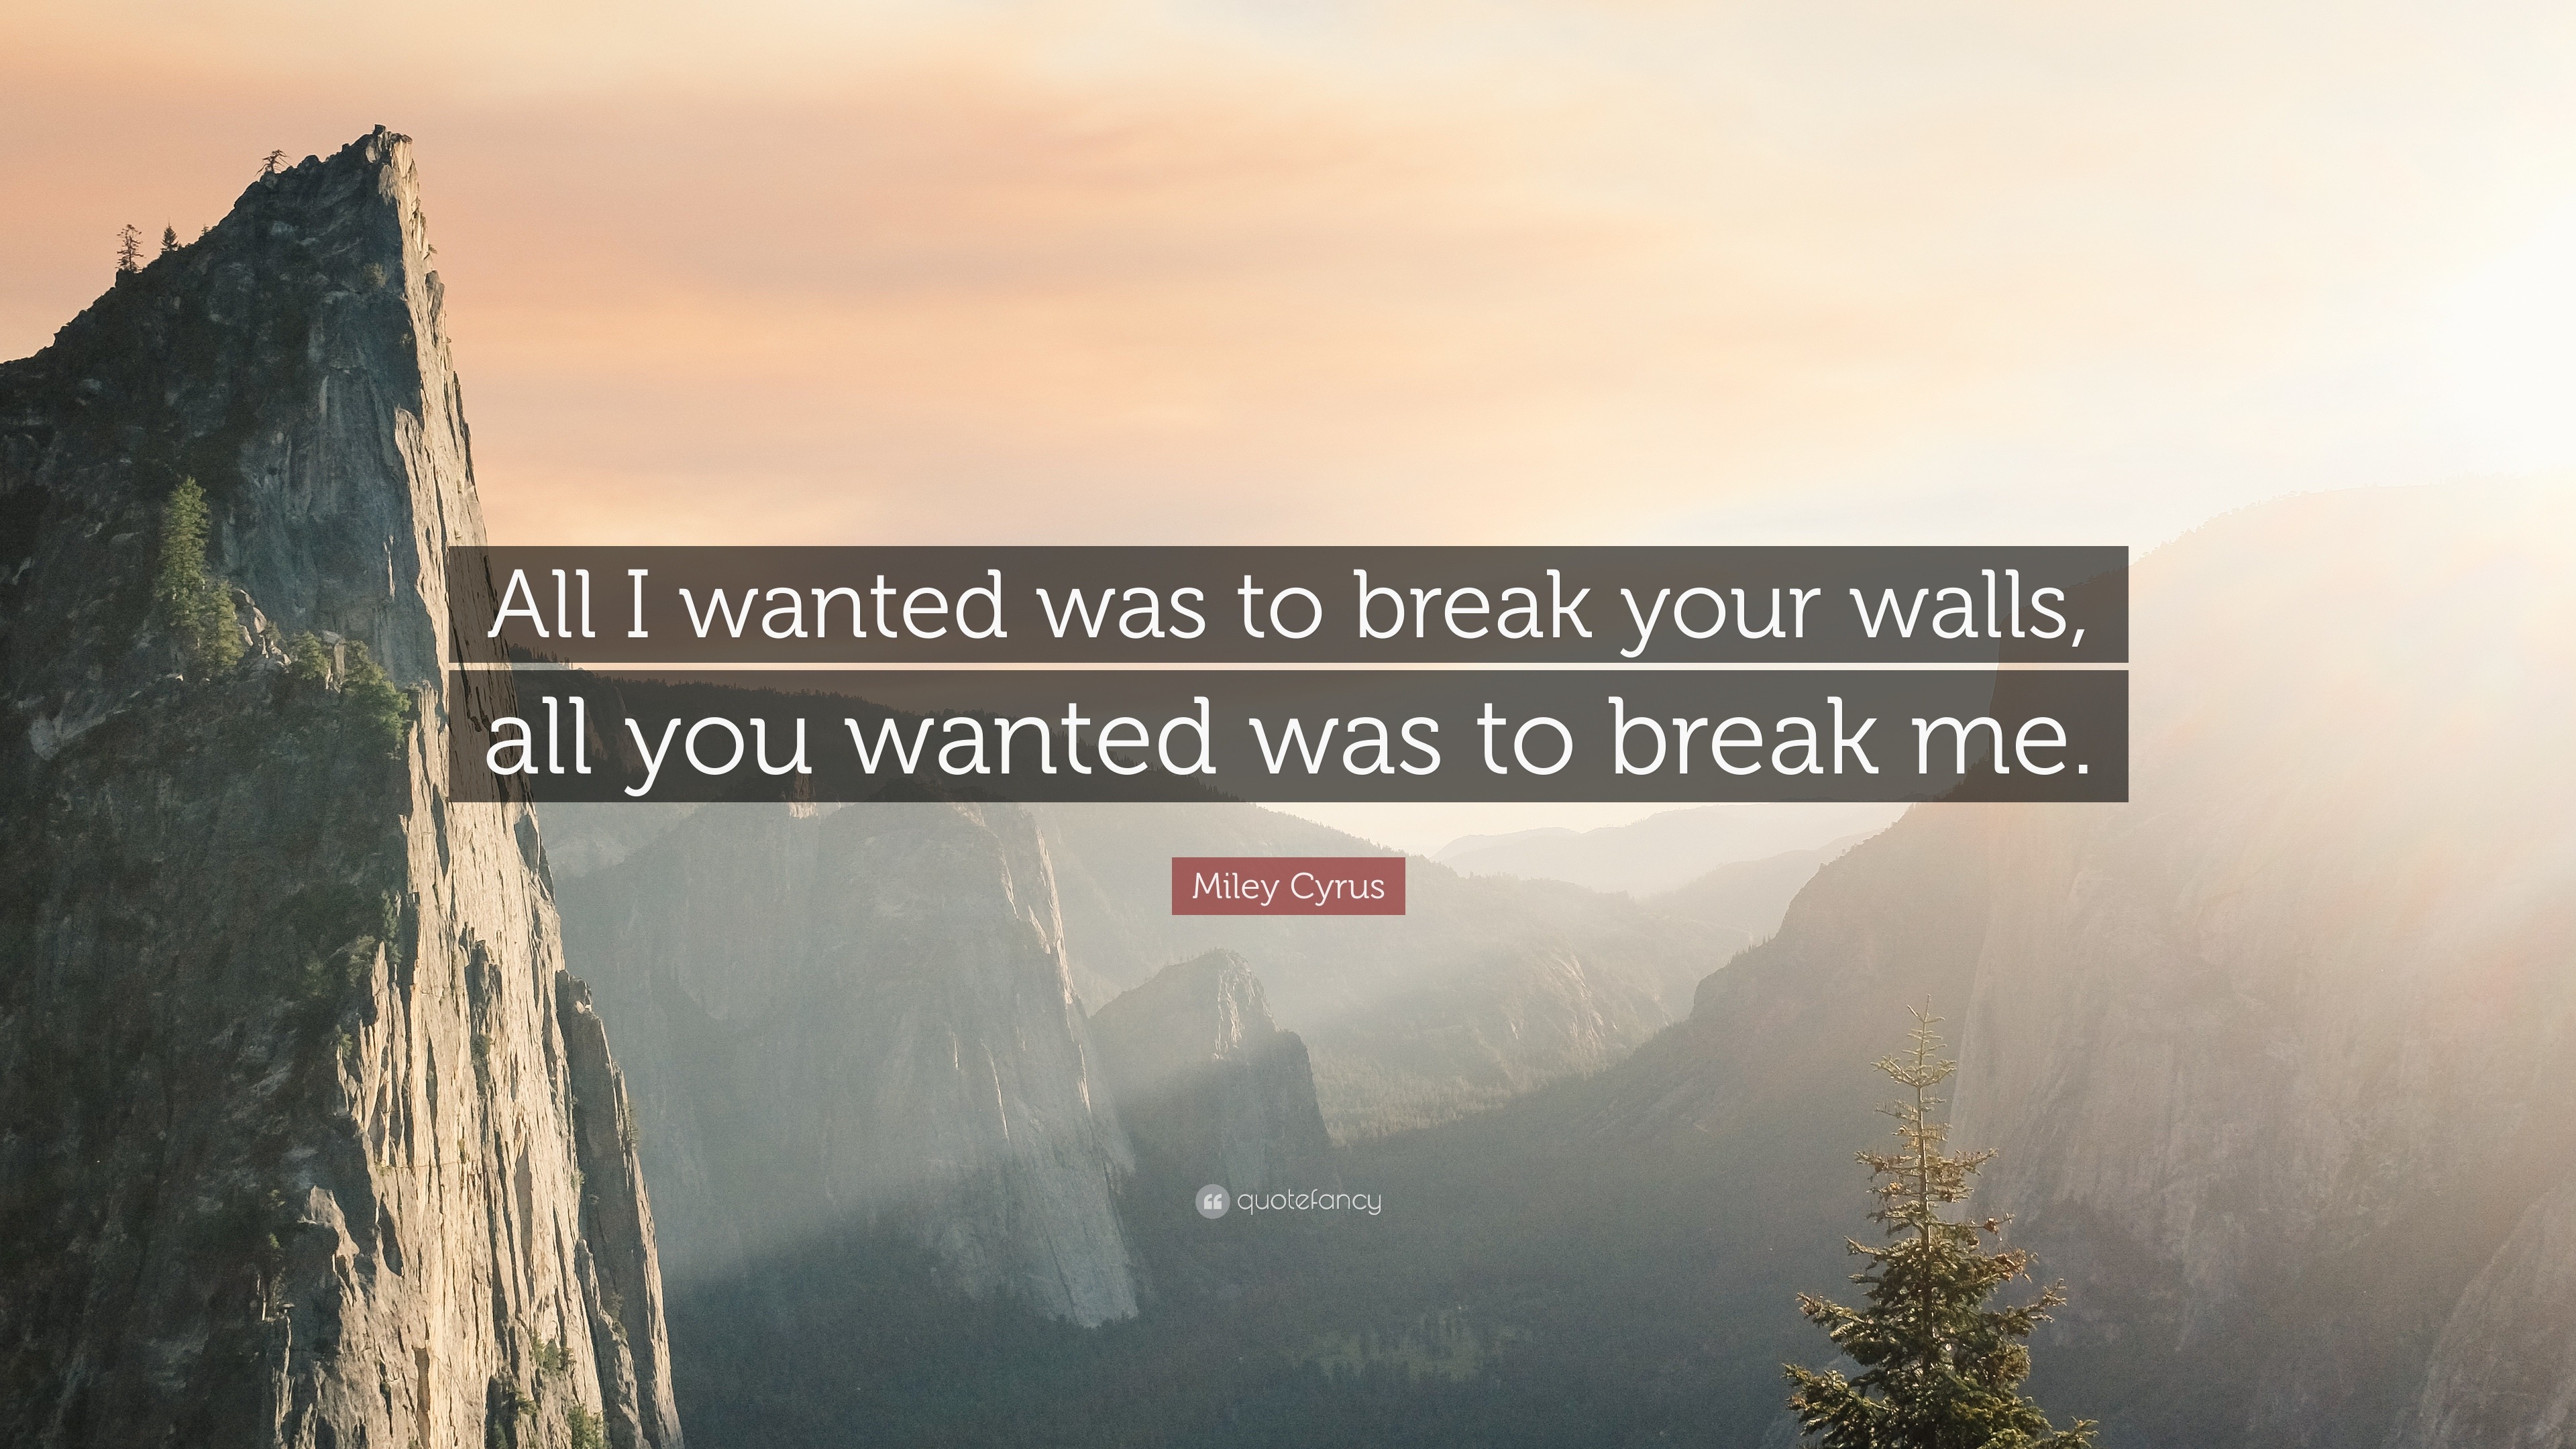 Miley Cyrus Quote All I Wanted Was To Break Your Walls All You Wanted Was To Break Me 7 Wallpapers Quotefancy